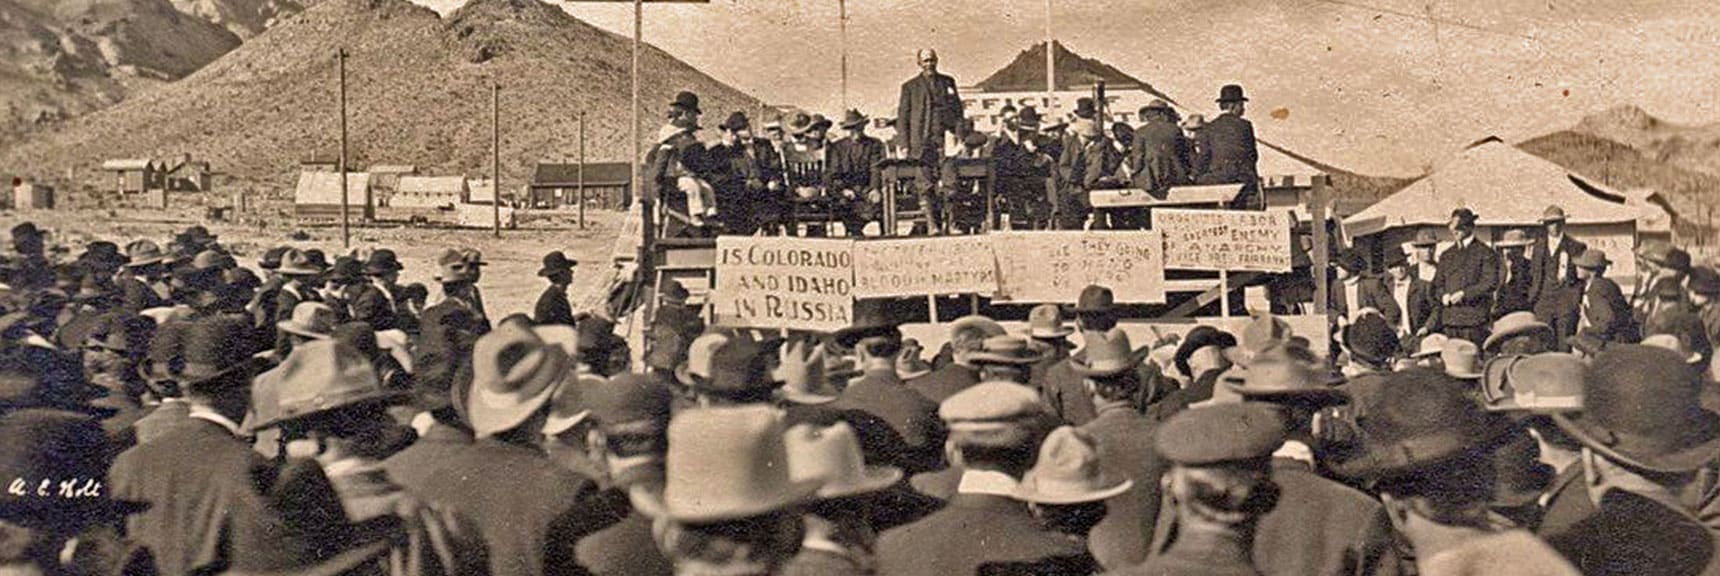 Miner's Union Protest Meeting, 1907 | Rhyolite Ghost Town, Nevada